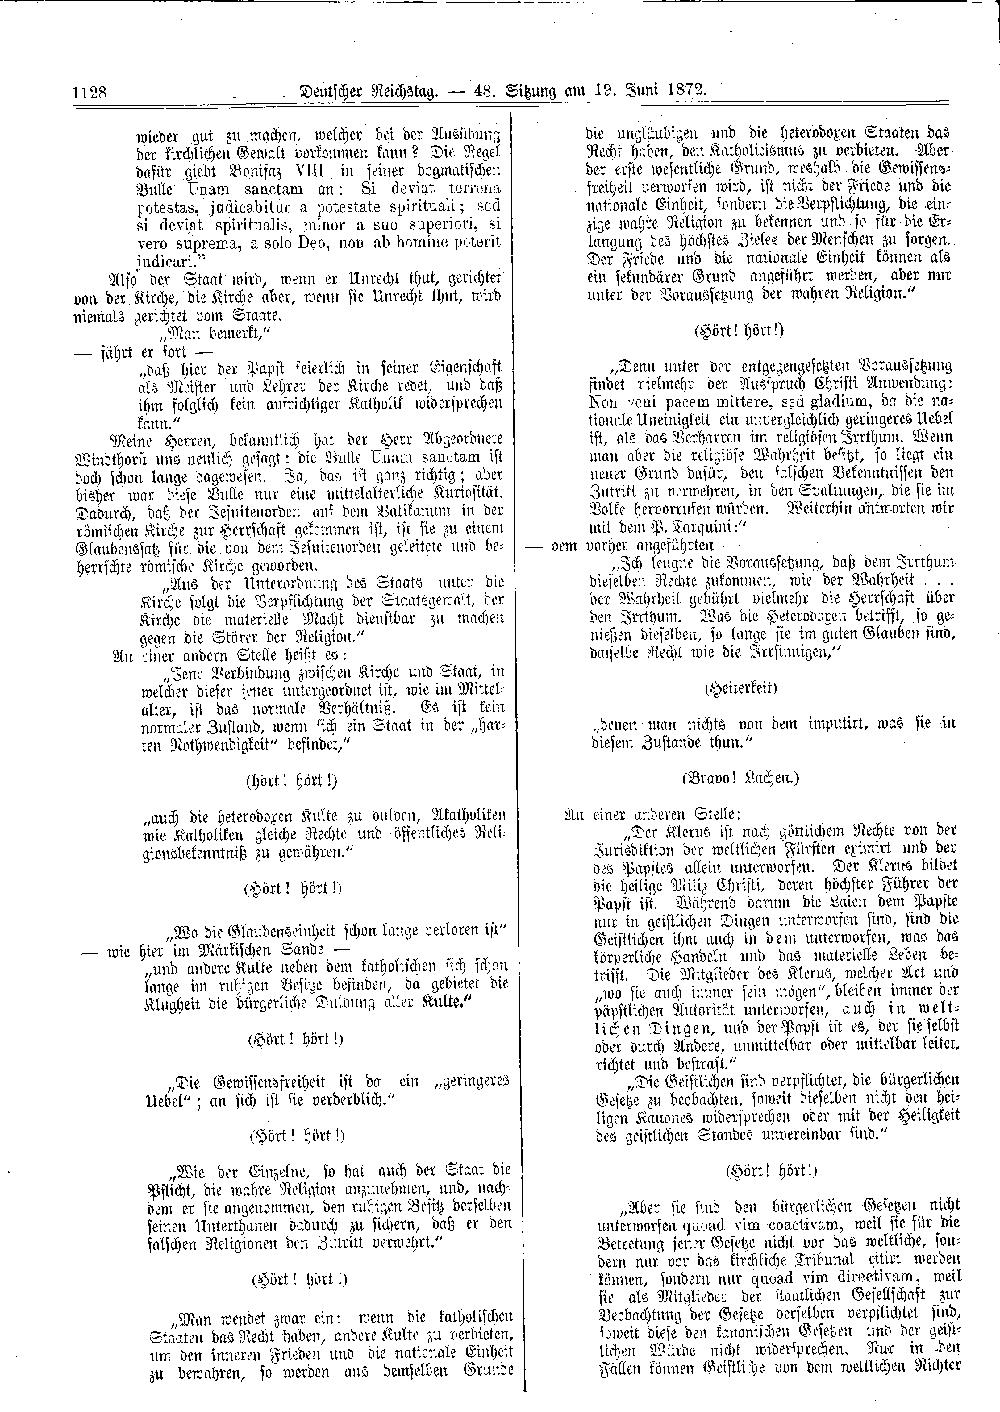 Scan of page 1128